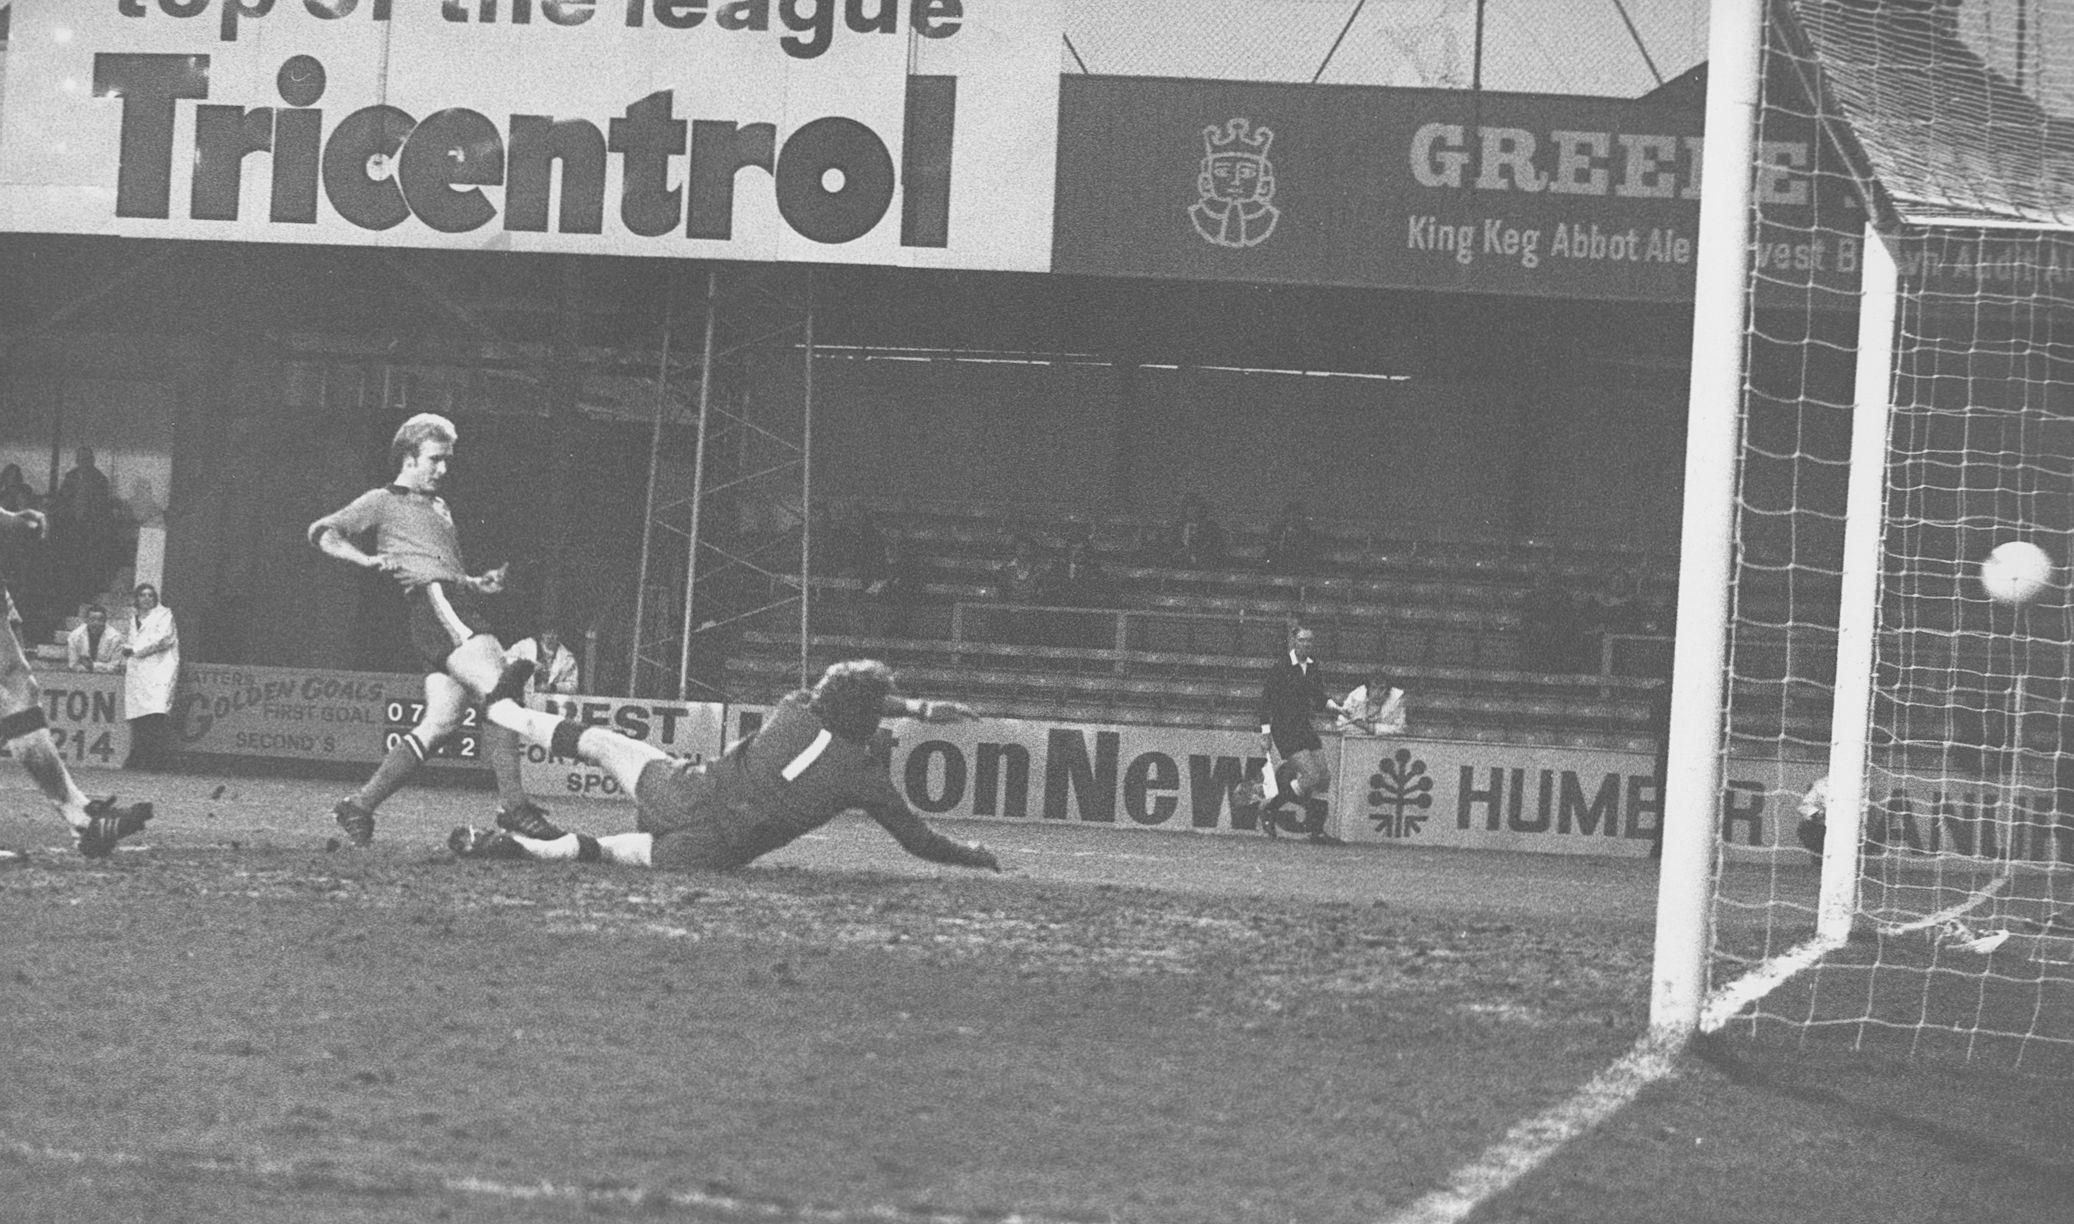 An alternative view of the third goal scored by Ron Futcher